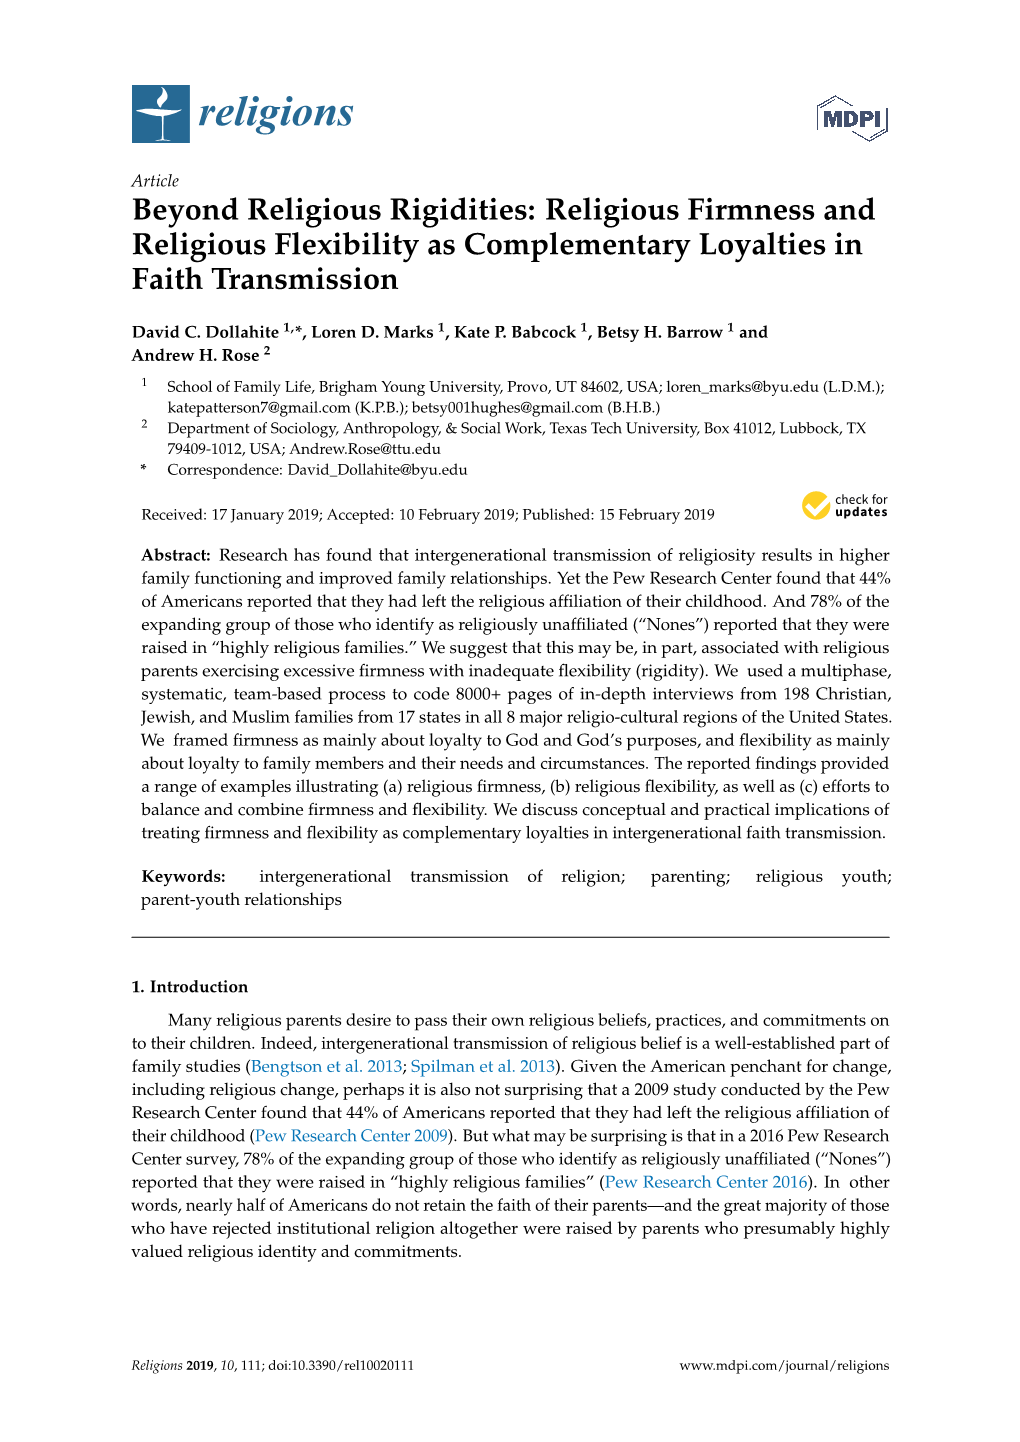 Beyond Religious Rigidities: Religious Firmness and Religious Flexibility As Complementary Loyalties in Faith Transmission